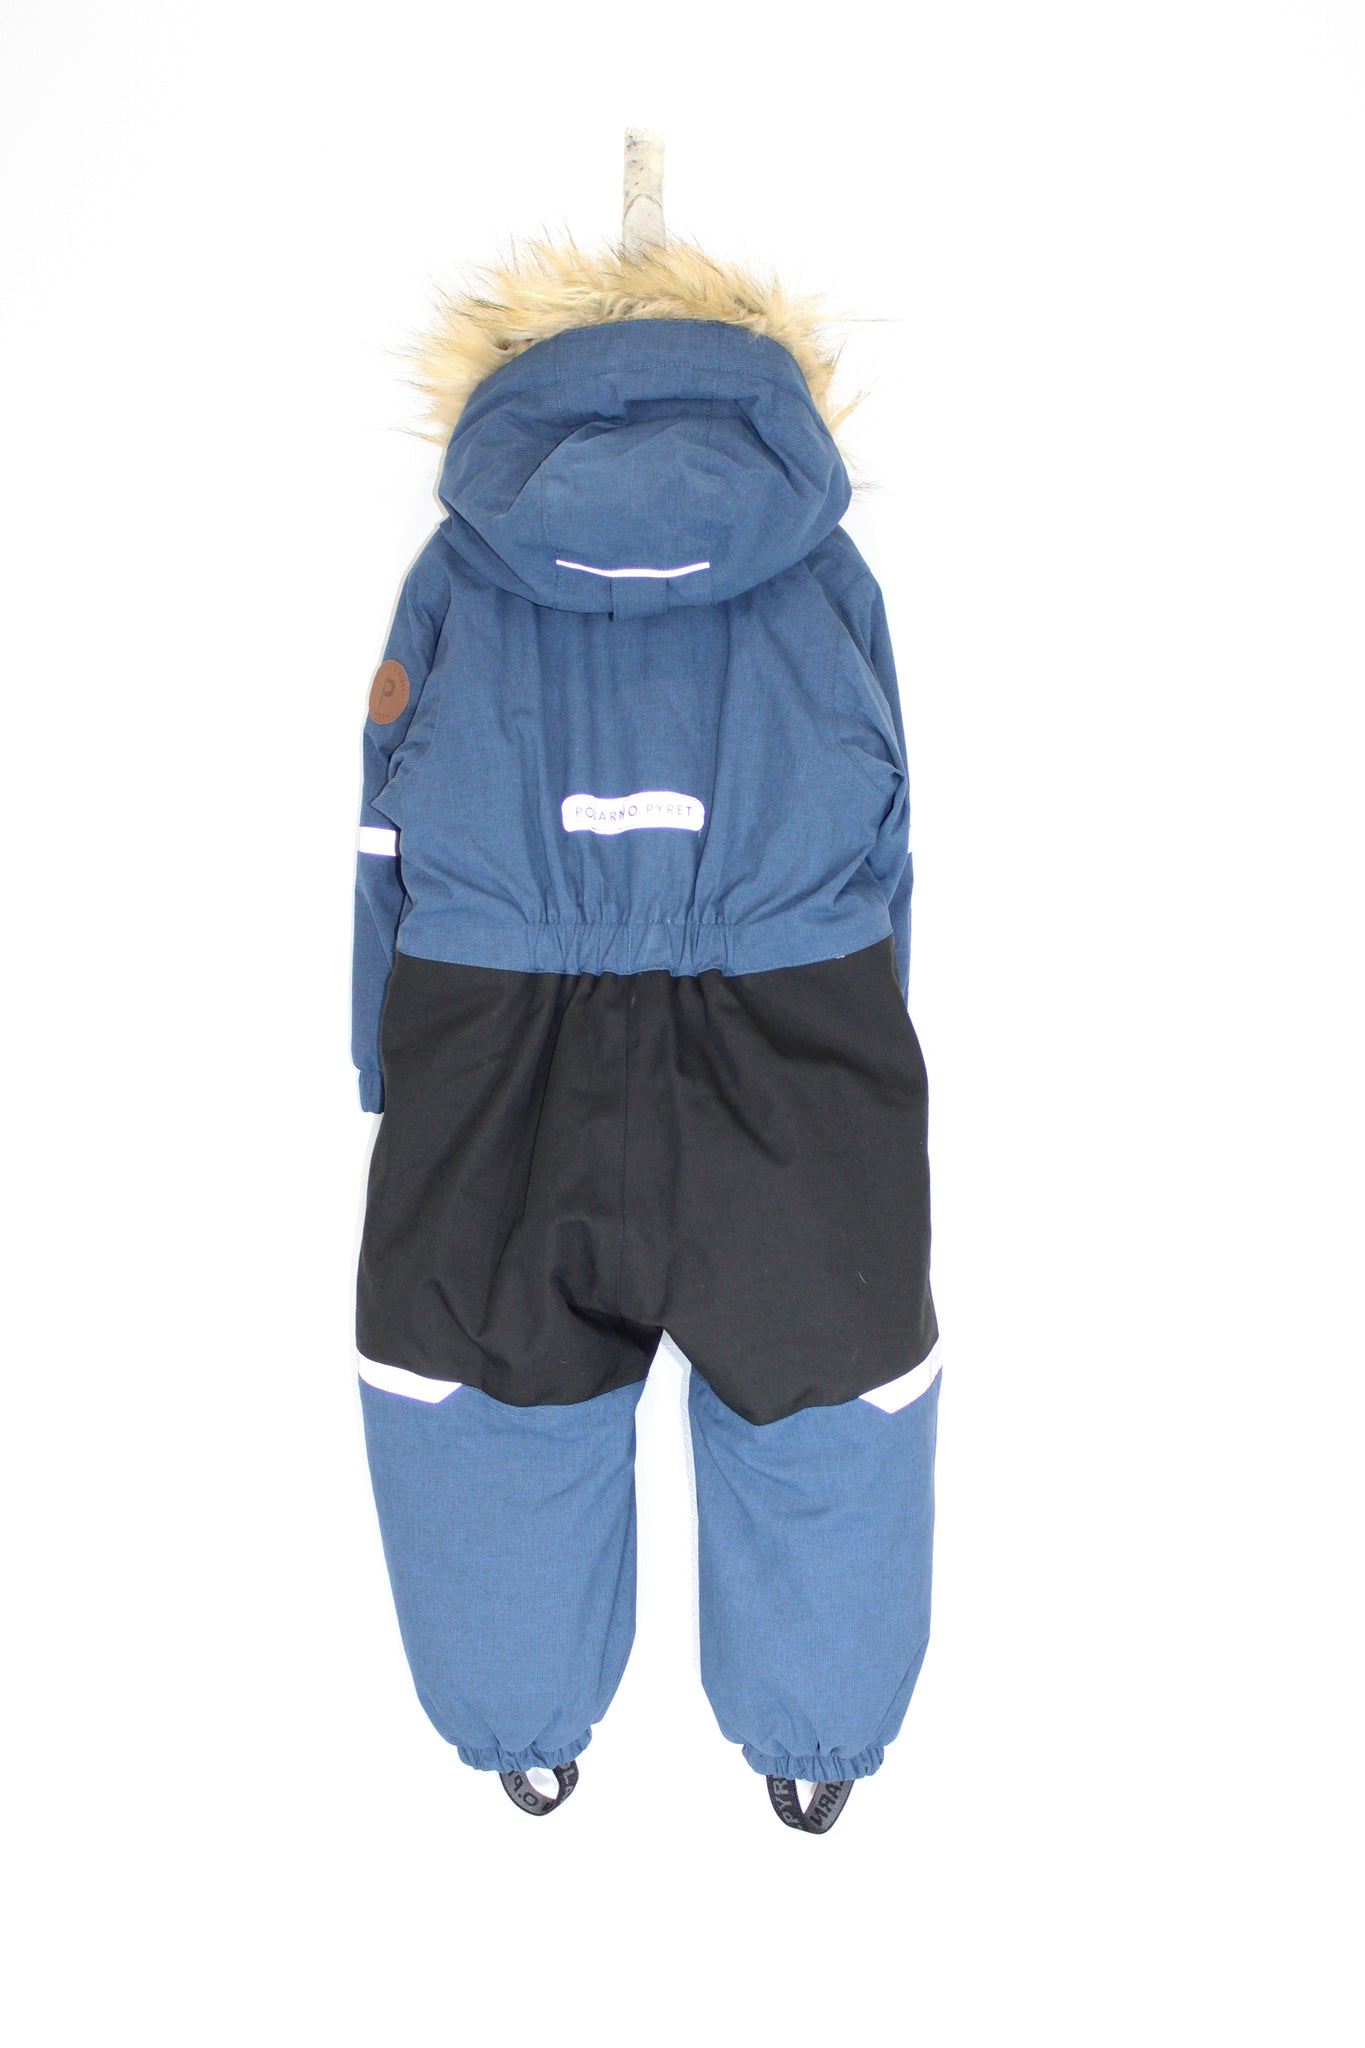 Kids Padded Overall 1-1.5y / 86